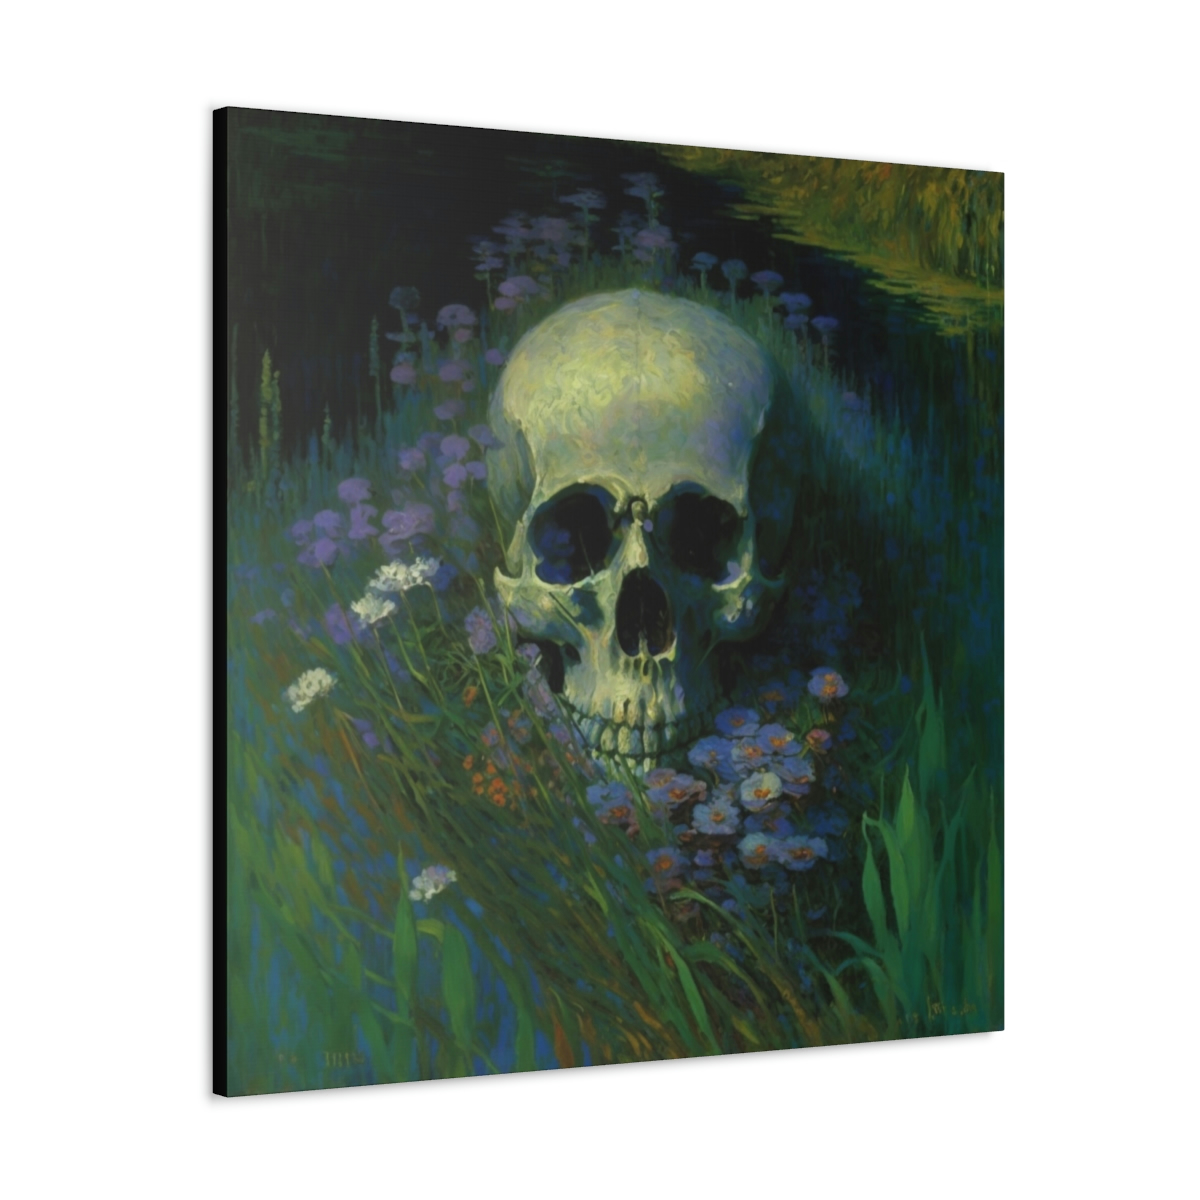 Skull Art Canvas Print: The Watery Grave